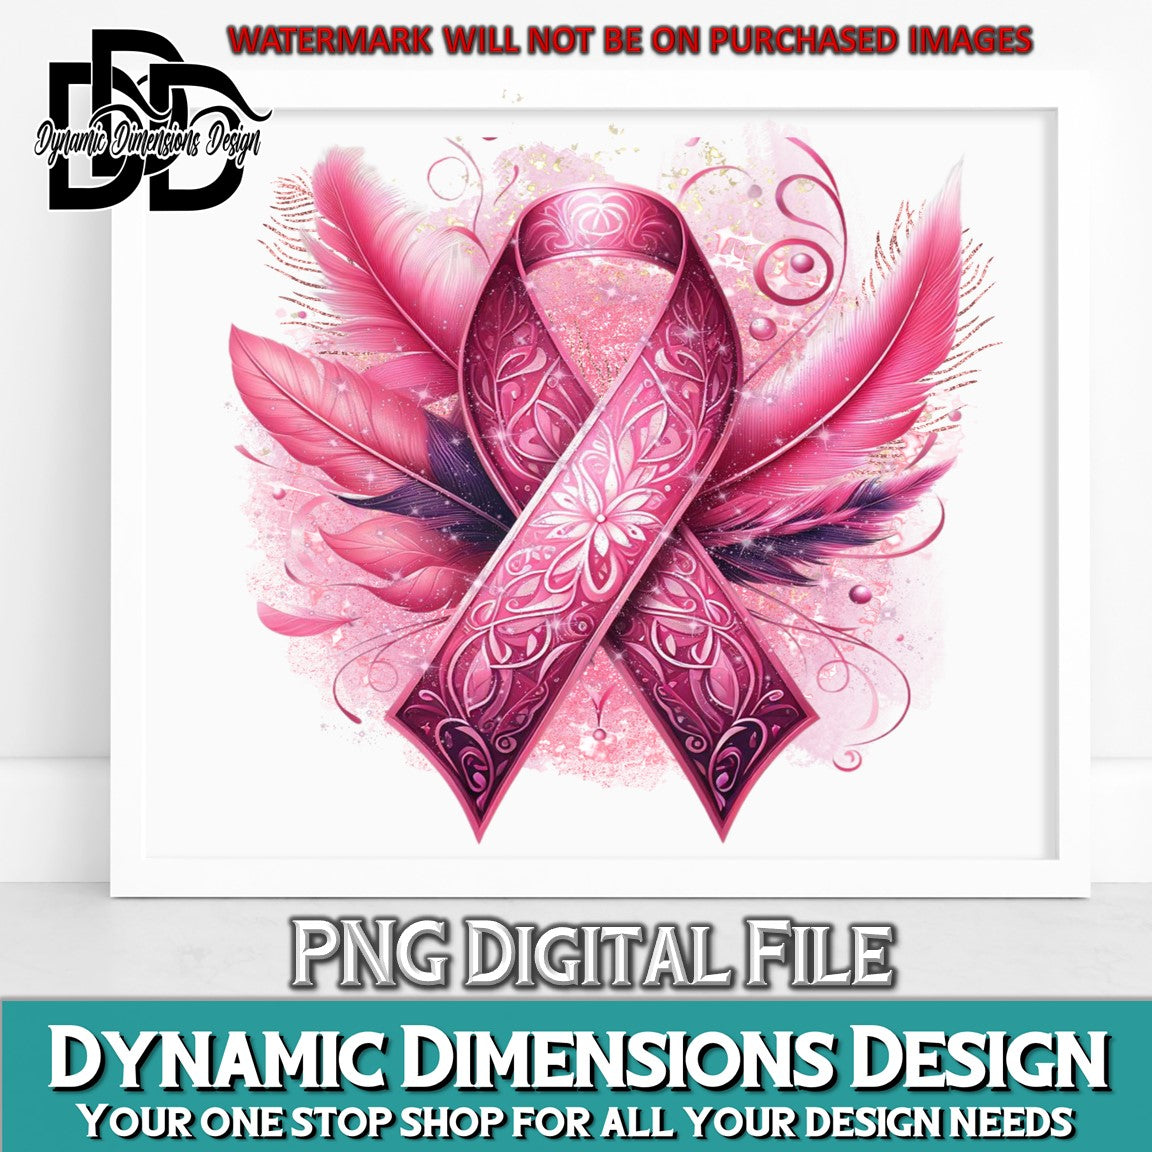 Breast Cancer Ribbon Png